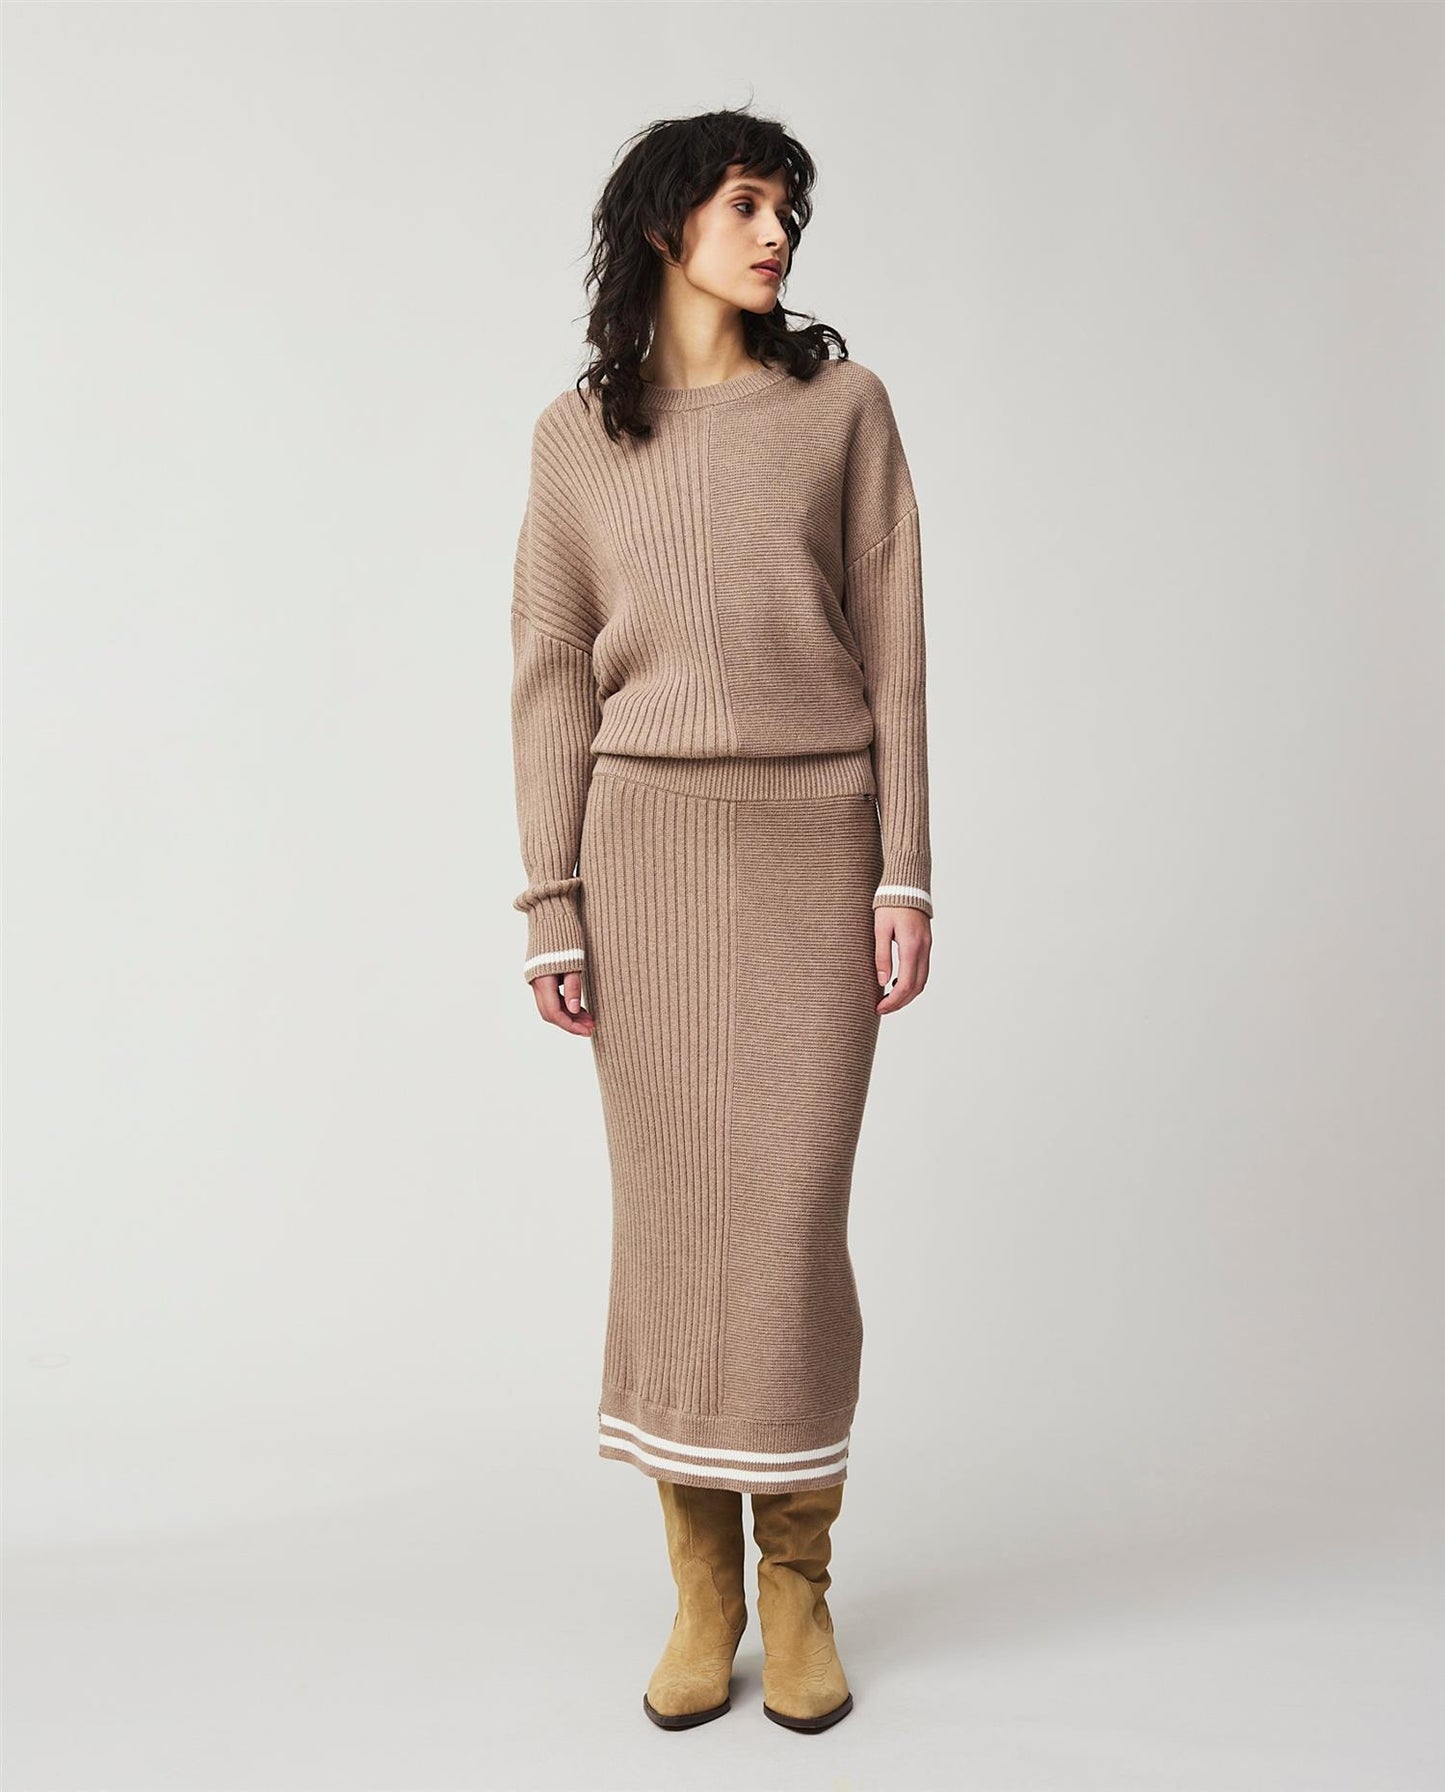 Agnes Organic Cotton/Cashmere Knitted Skirt